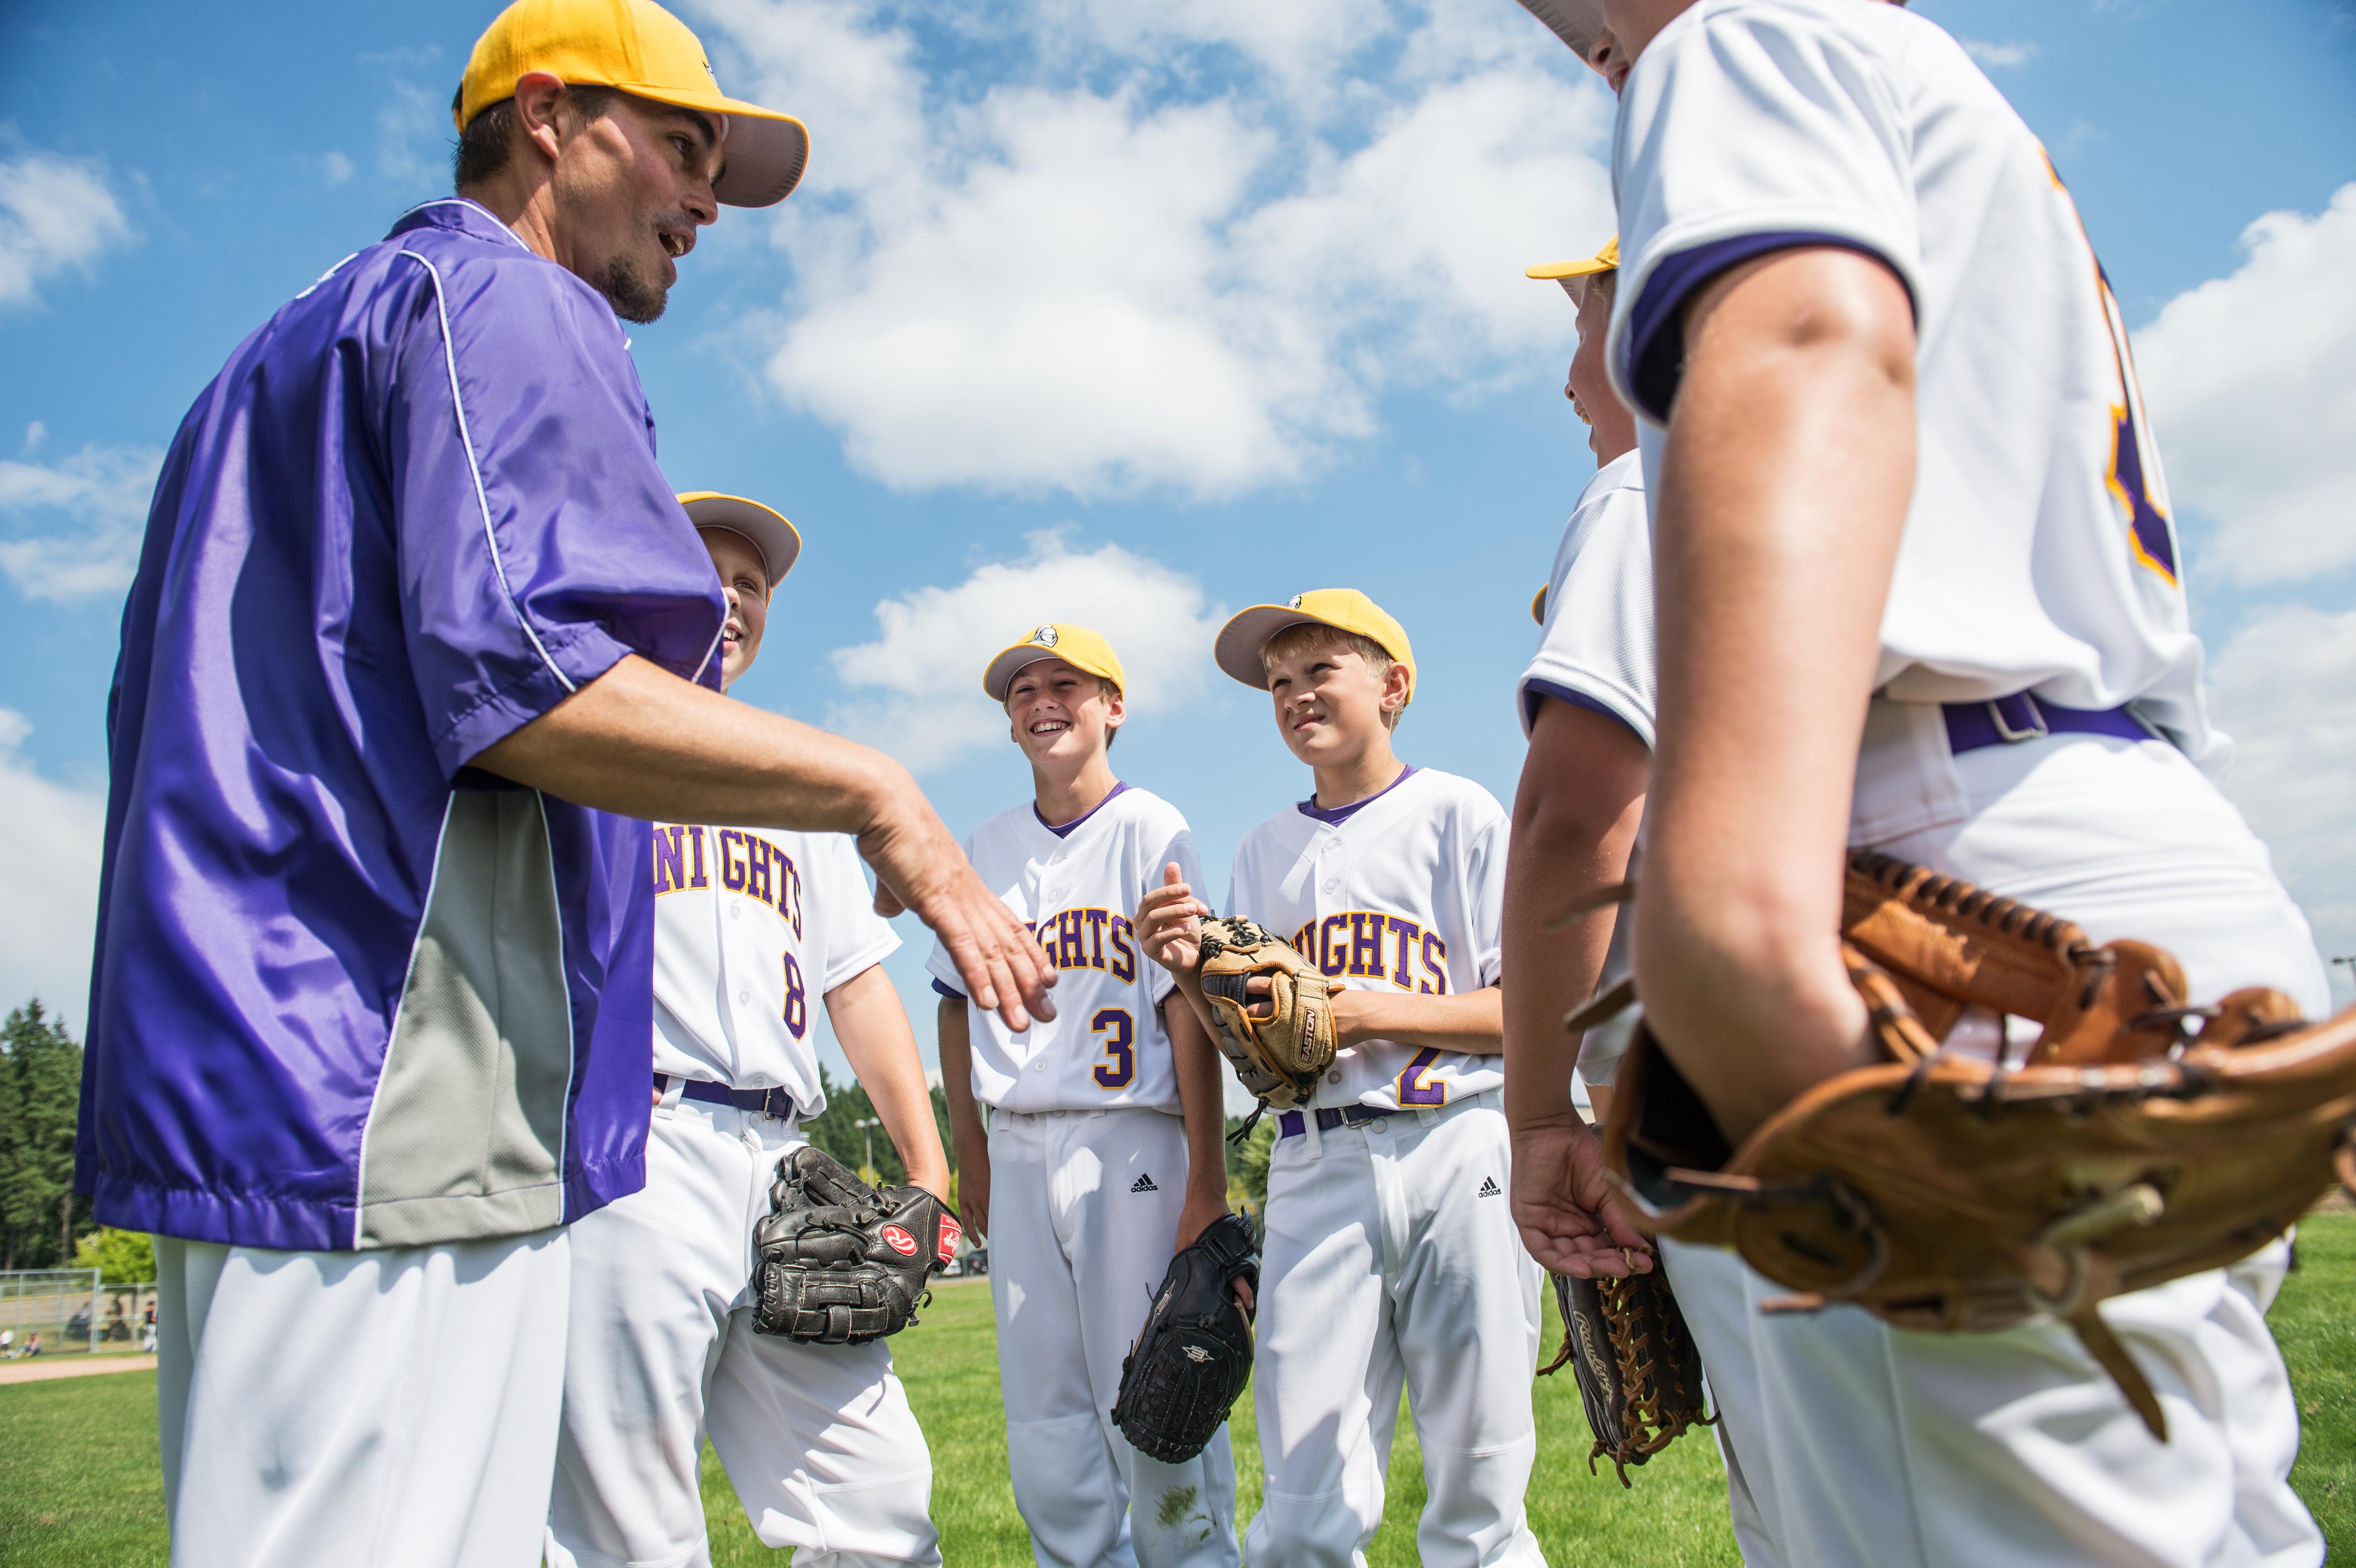 Baseball Coaching Tips: The Benefits of Positive Coaching | PRO TIPS by  DICK'S Sporting Goods